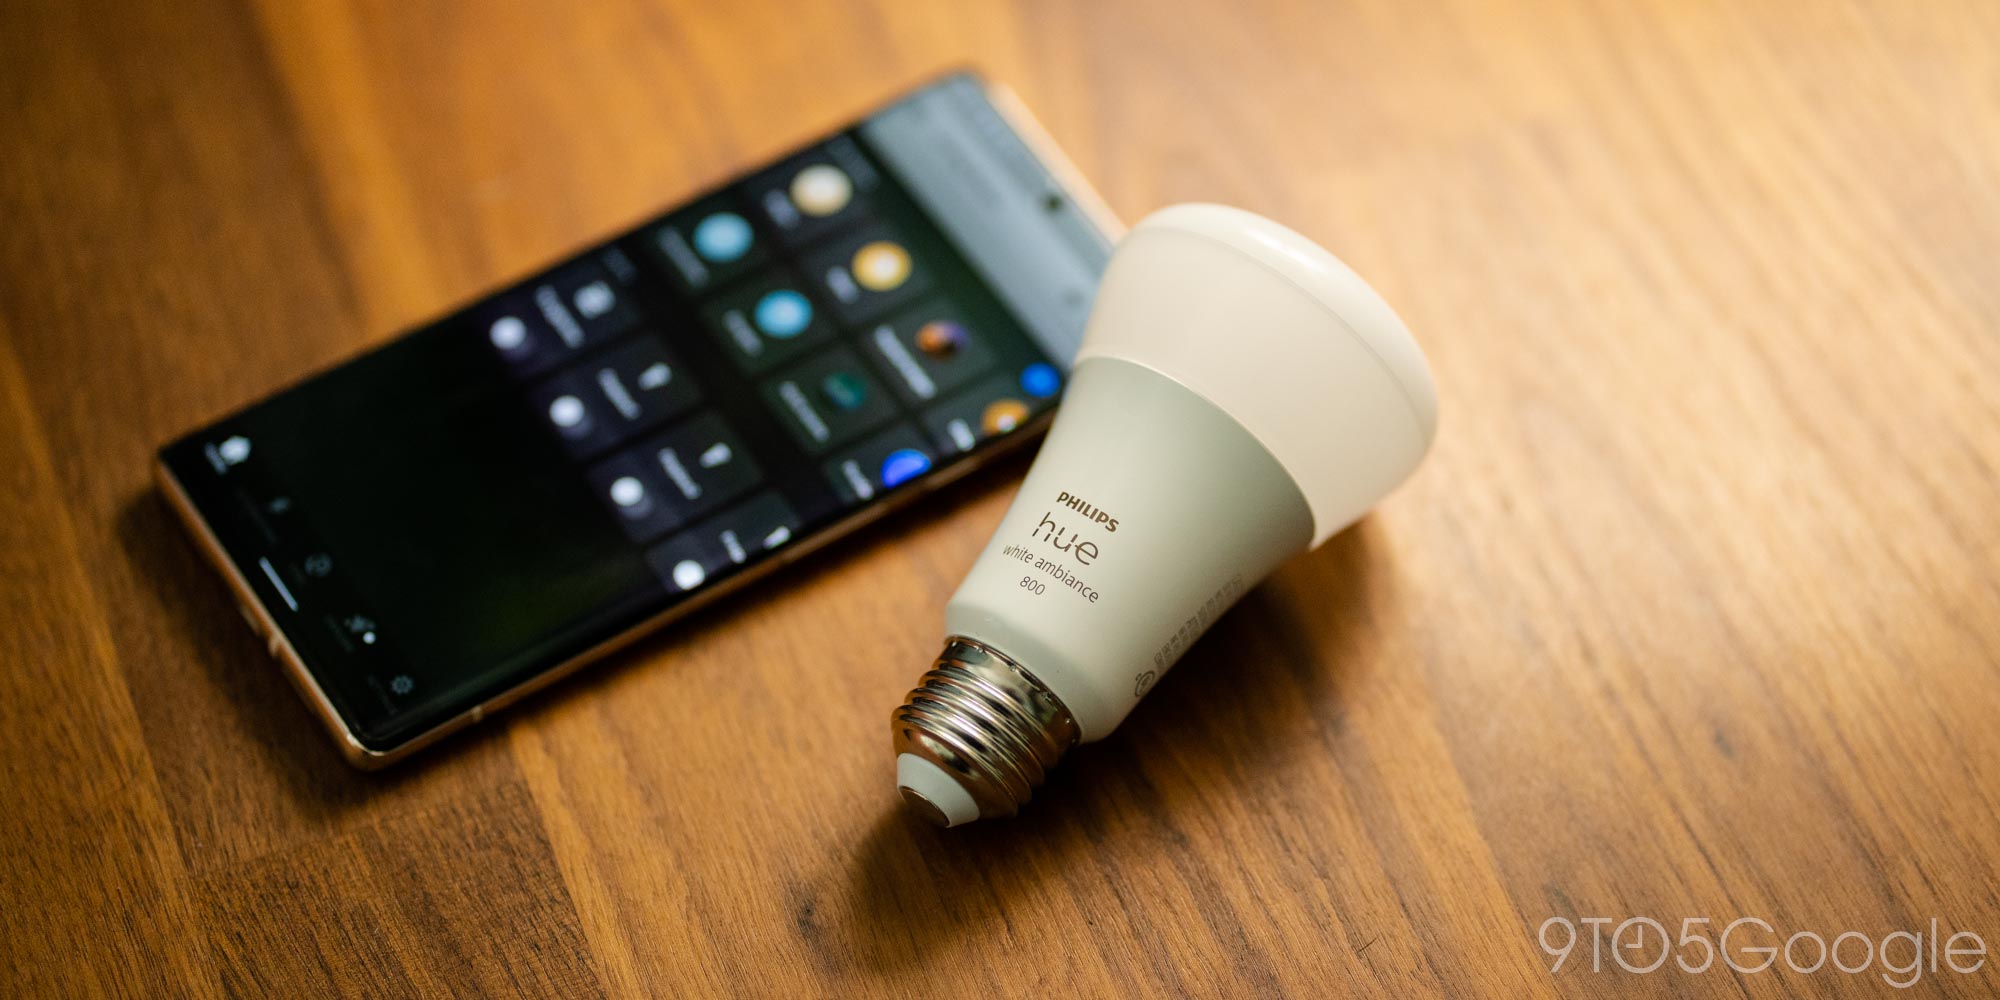 Philips Hue 'Natural Light' rolling out to some now